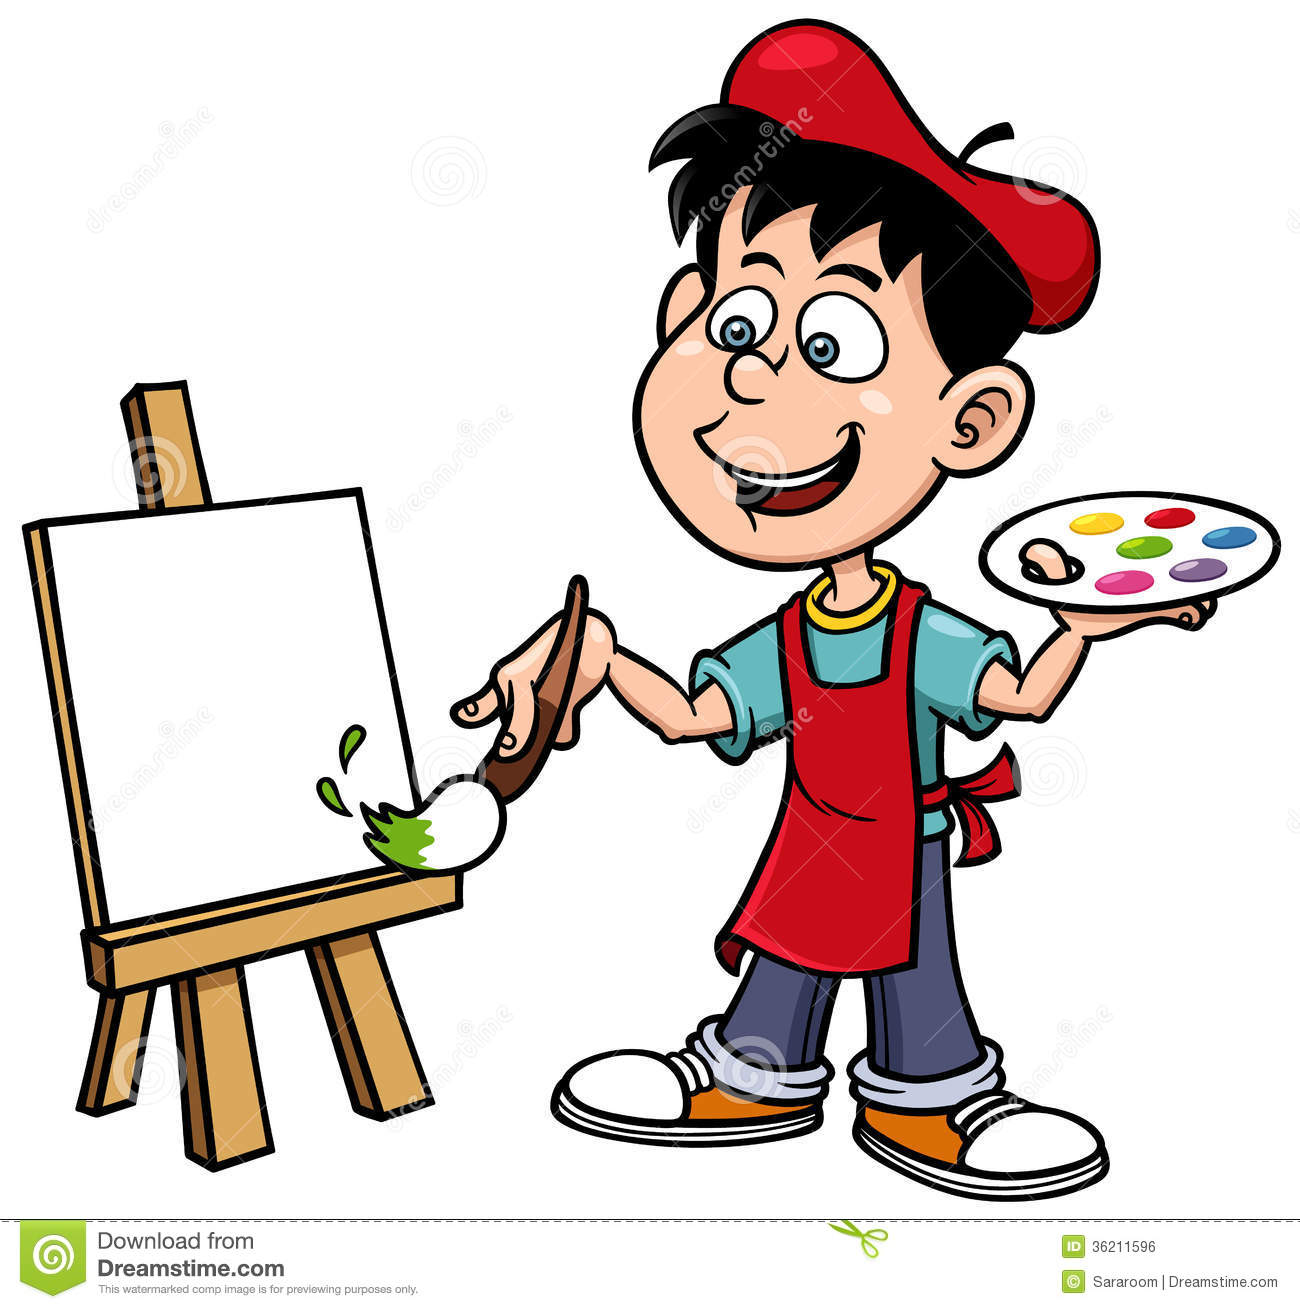 Painting clipart clipartlook.